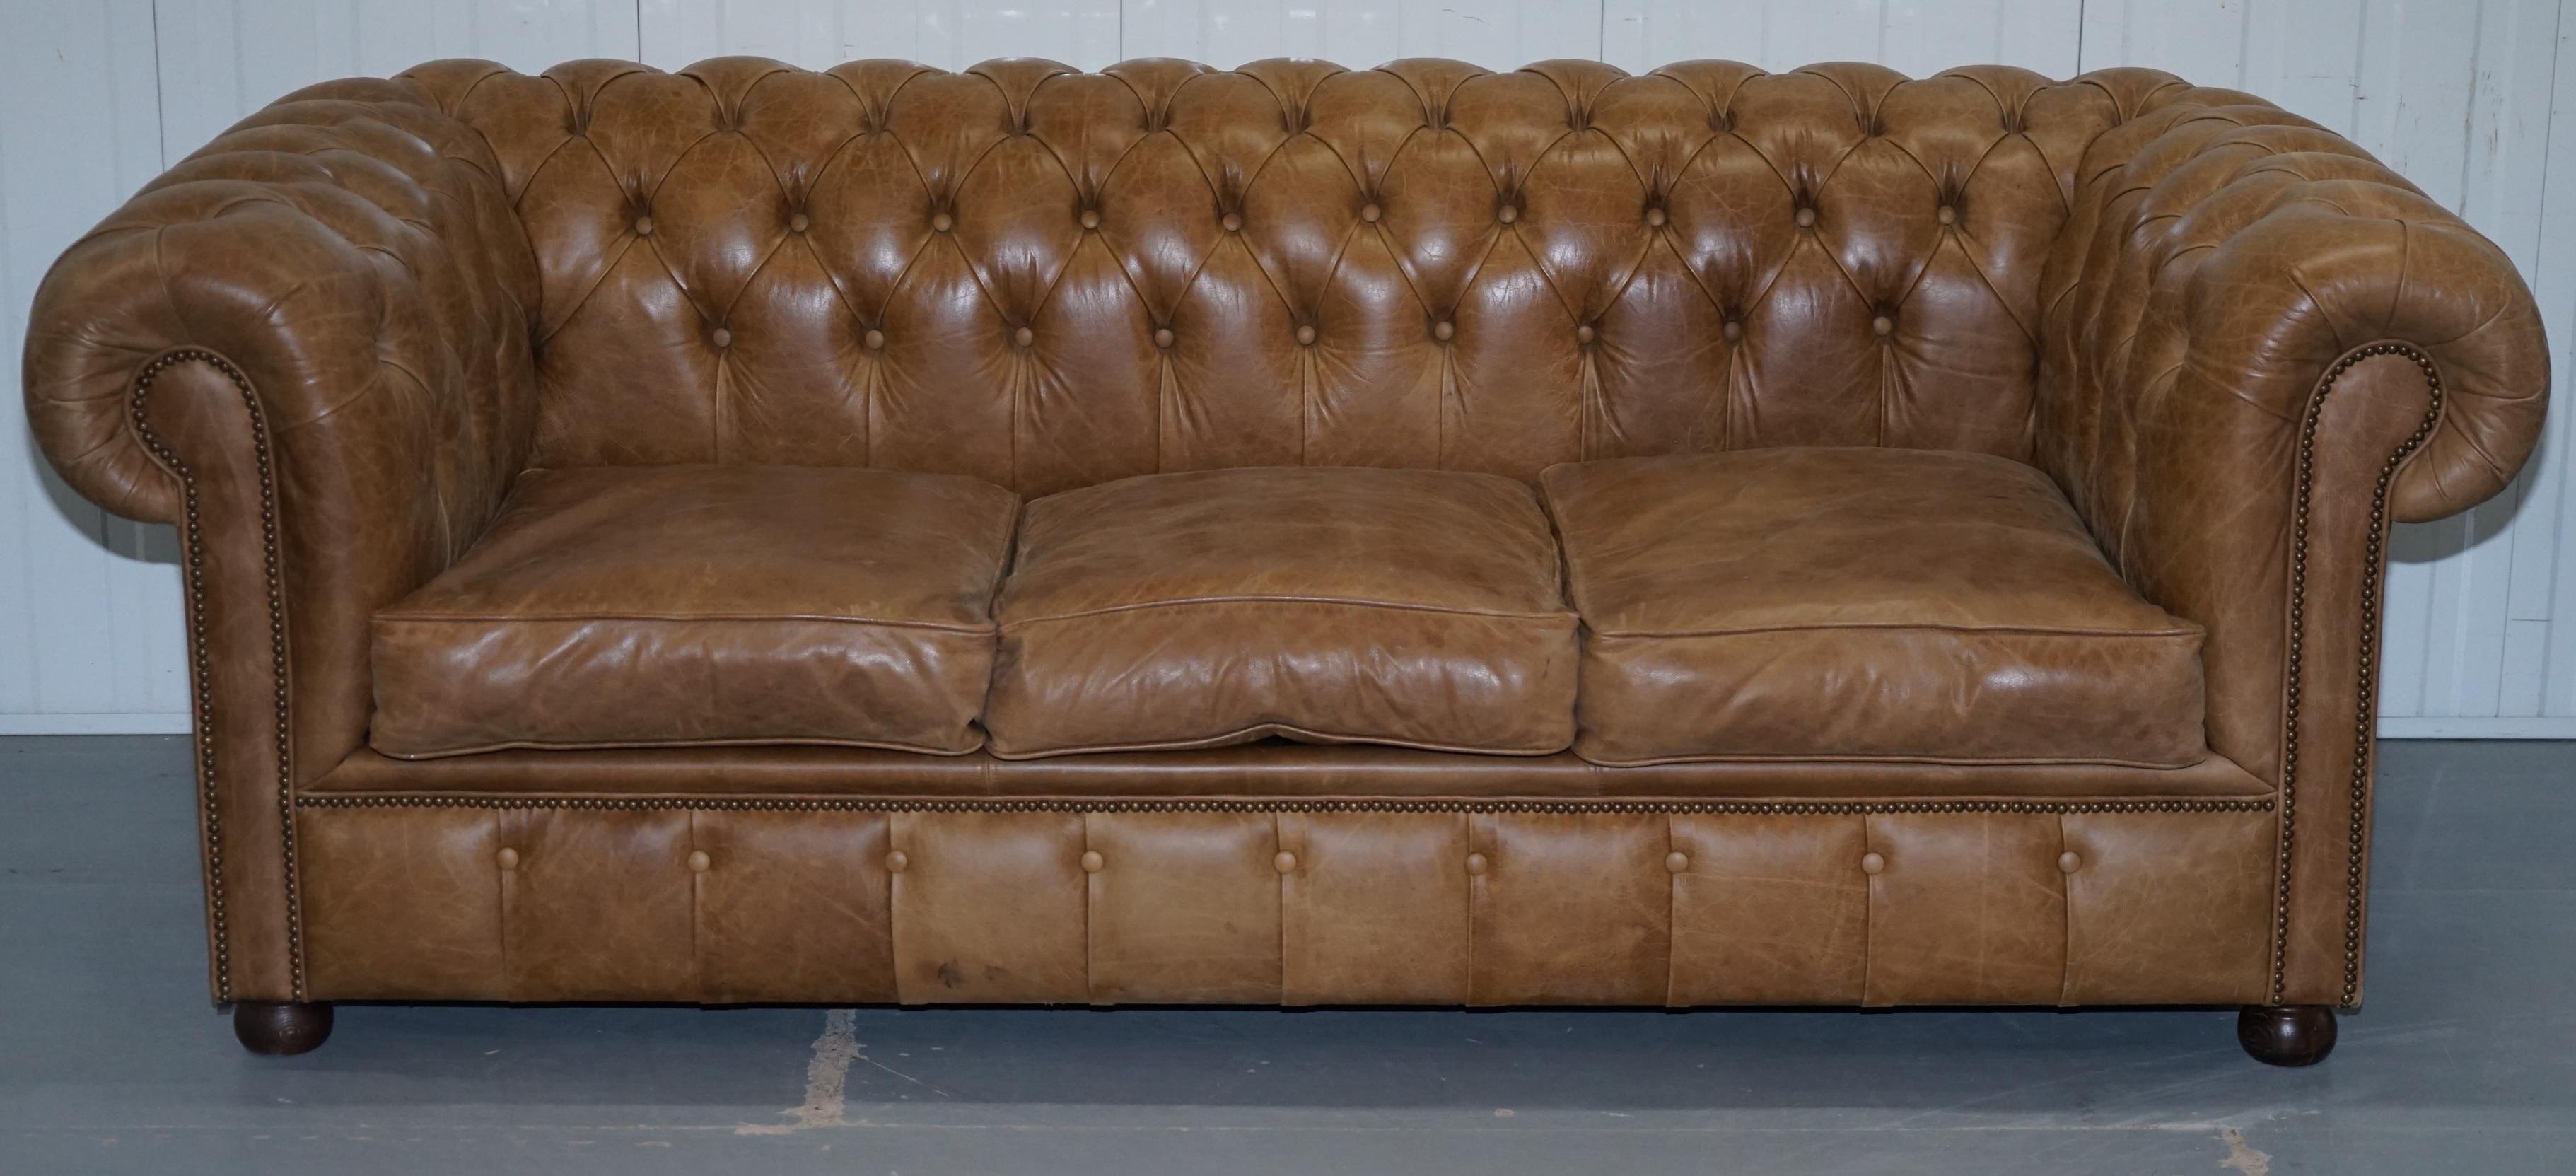 We are delighted to offer for sale this nice vintage Heritage aged brown leather Chesterfield sofabed in perfect condition

A very good looking and well-made sofabed. The bed has never been used, the normal sofabeds are only 118cm wide, this is